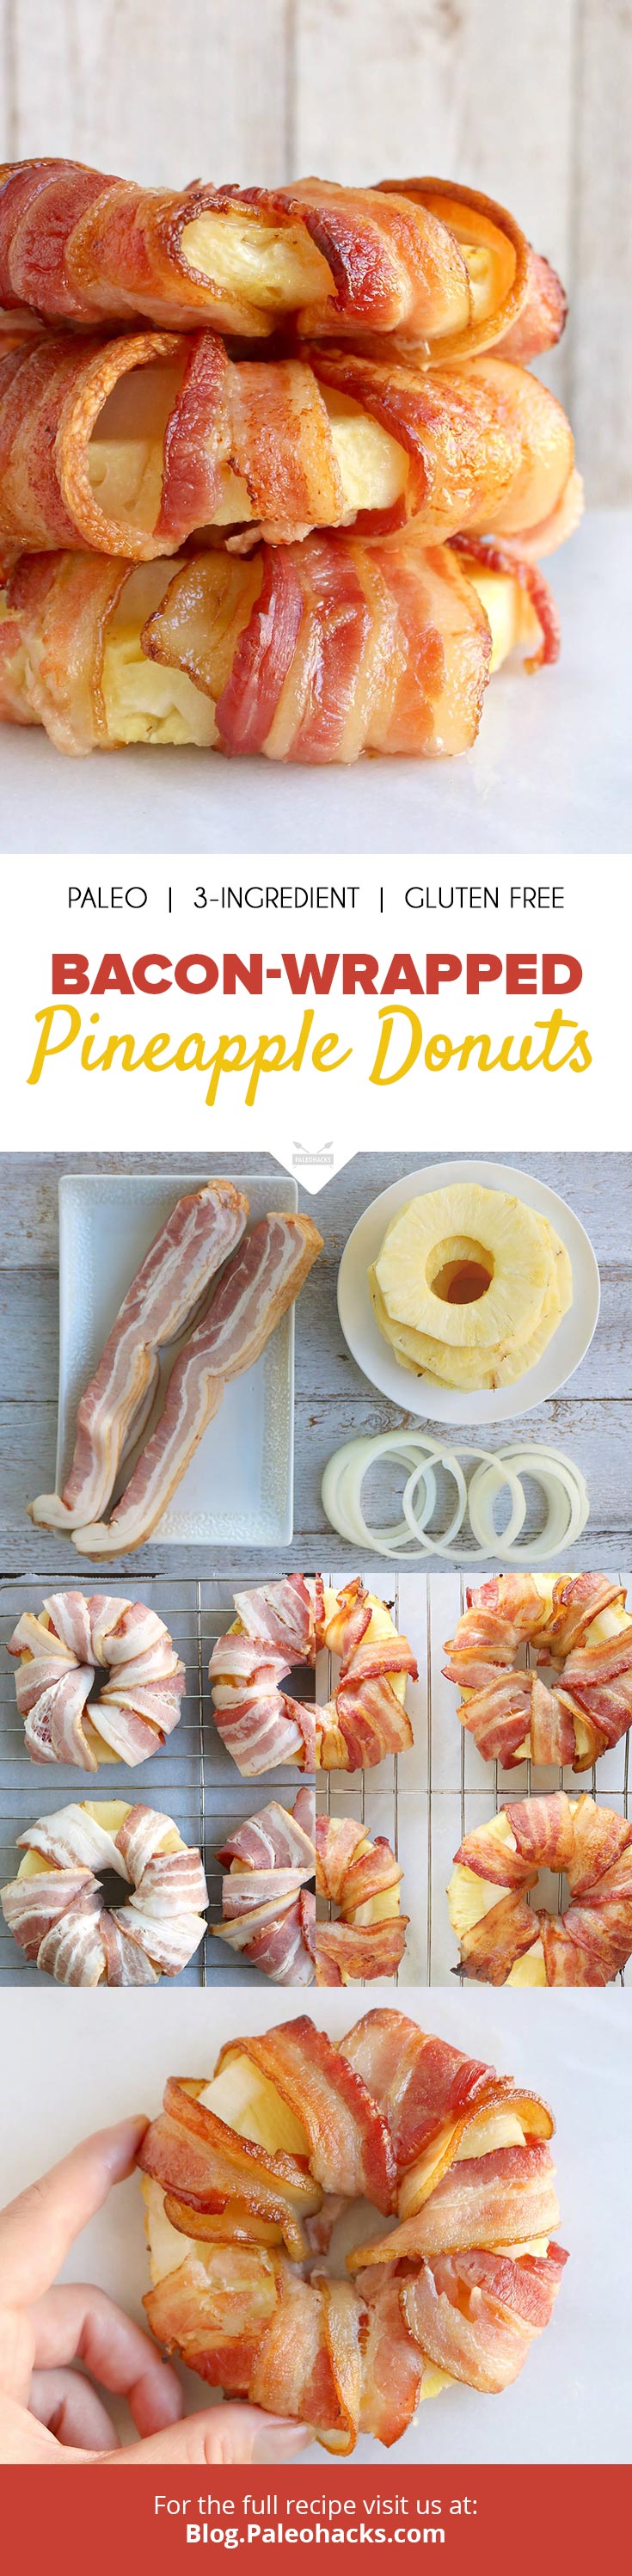 These bacon-wrapped pineapple donuts make an awesome game day appetizer, or can be piled on top of burgers for the ultimate topping.